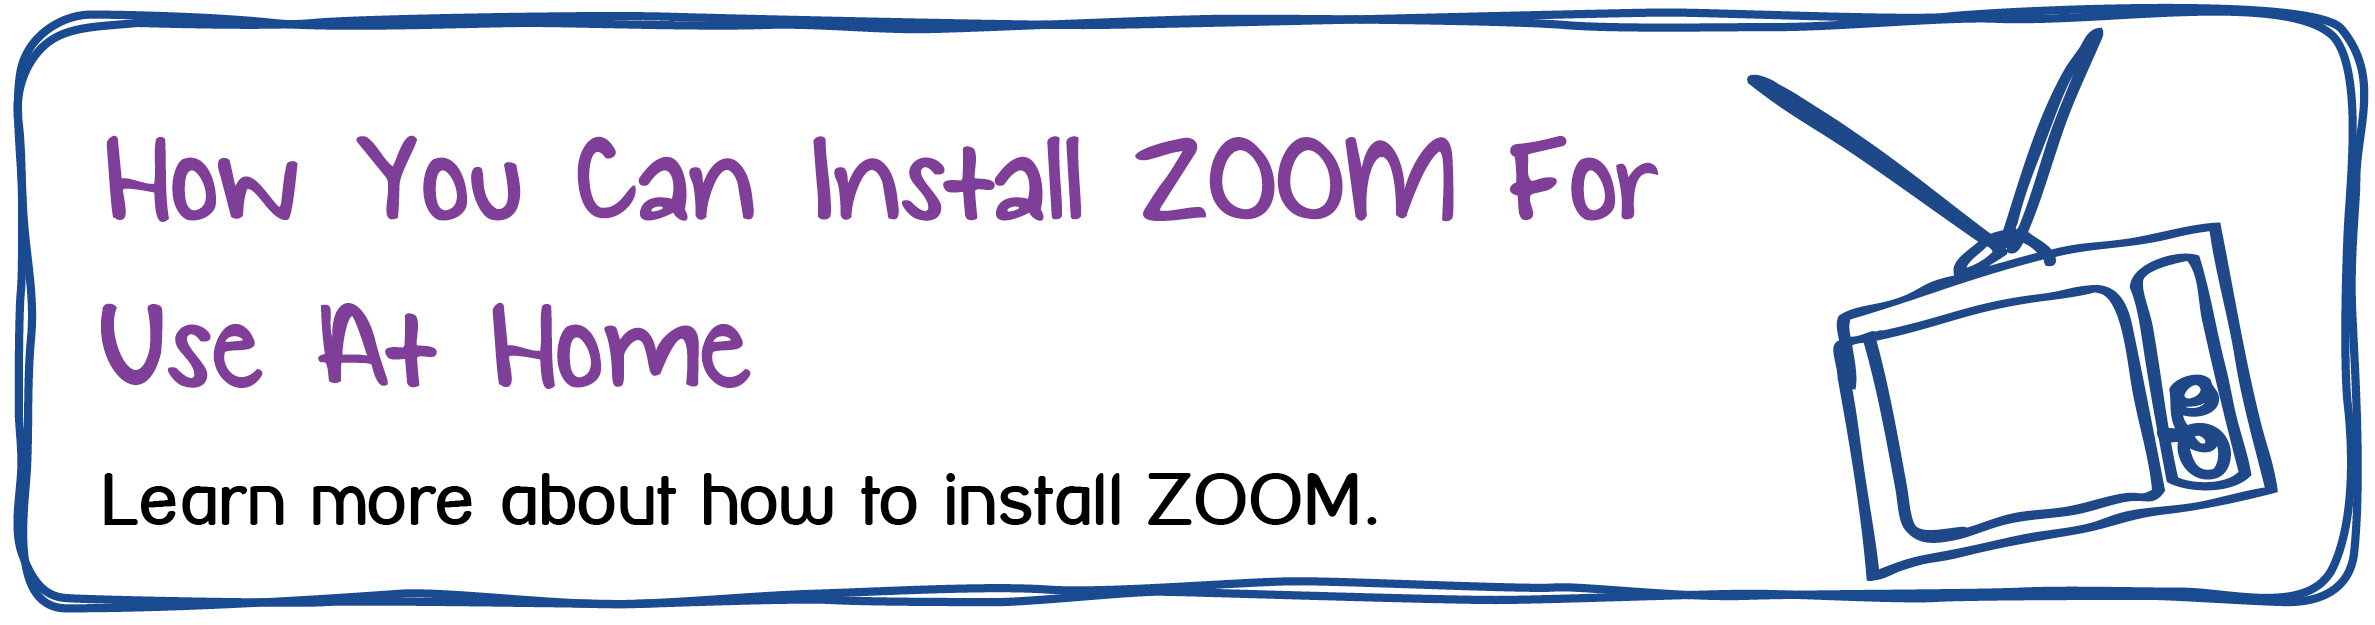 How You Can Install ZOOM For Use At Home. Learn more about how to install ZOOM.